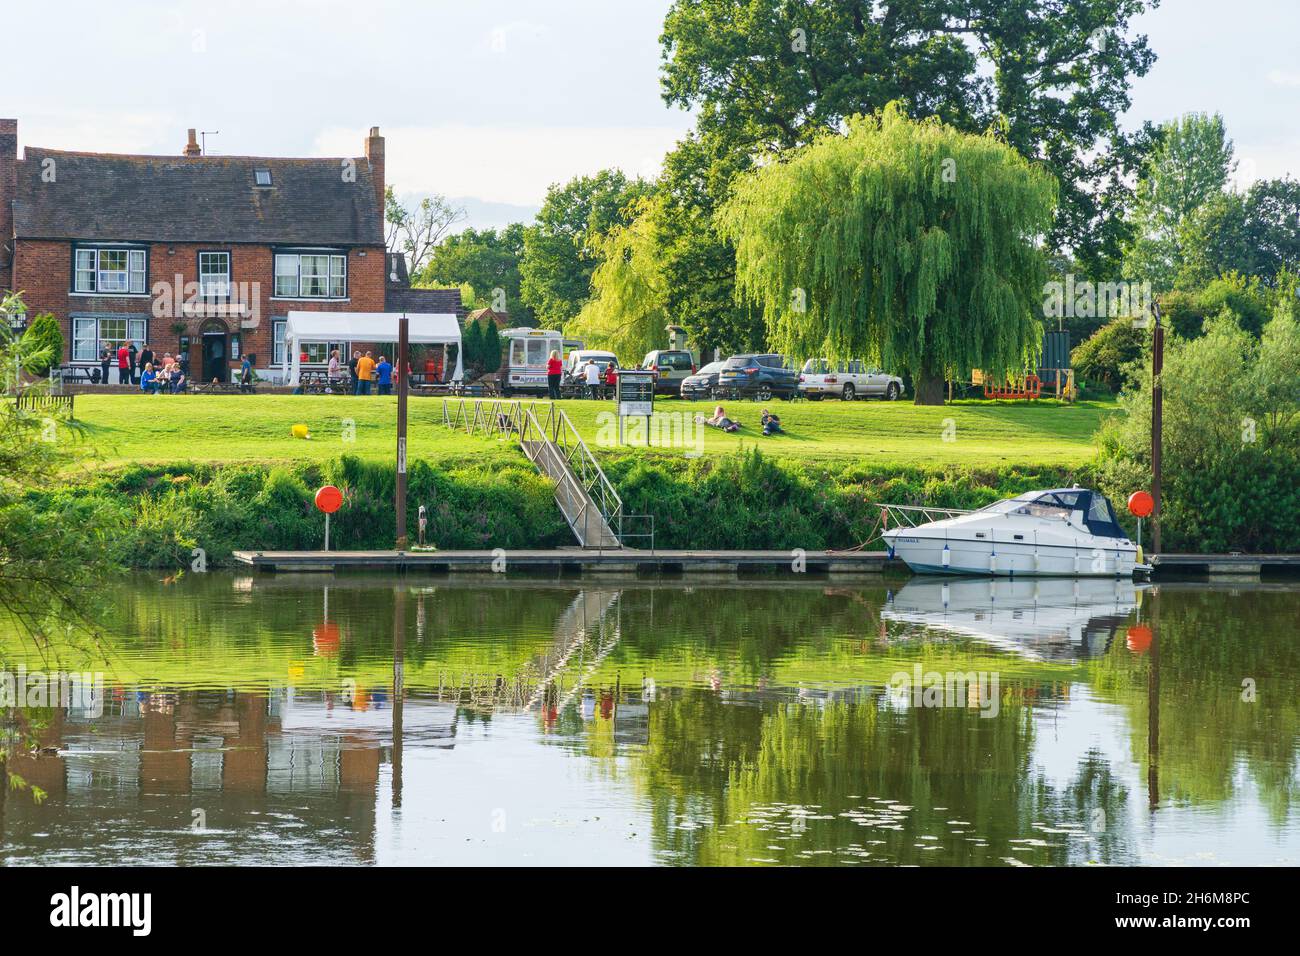 English public house next to the River Severn on a summer's day in England, UK Stock Photo